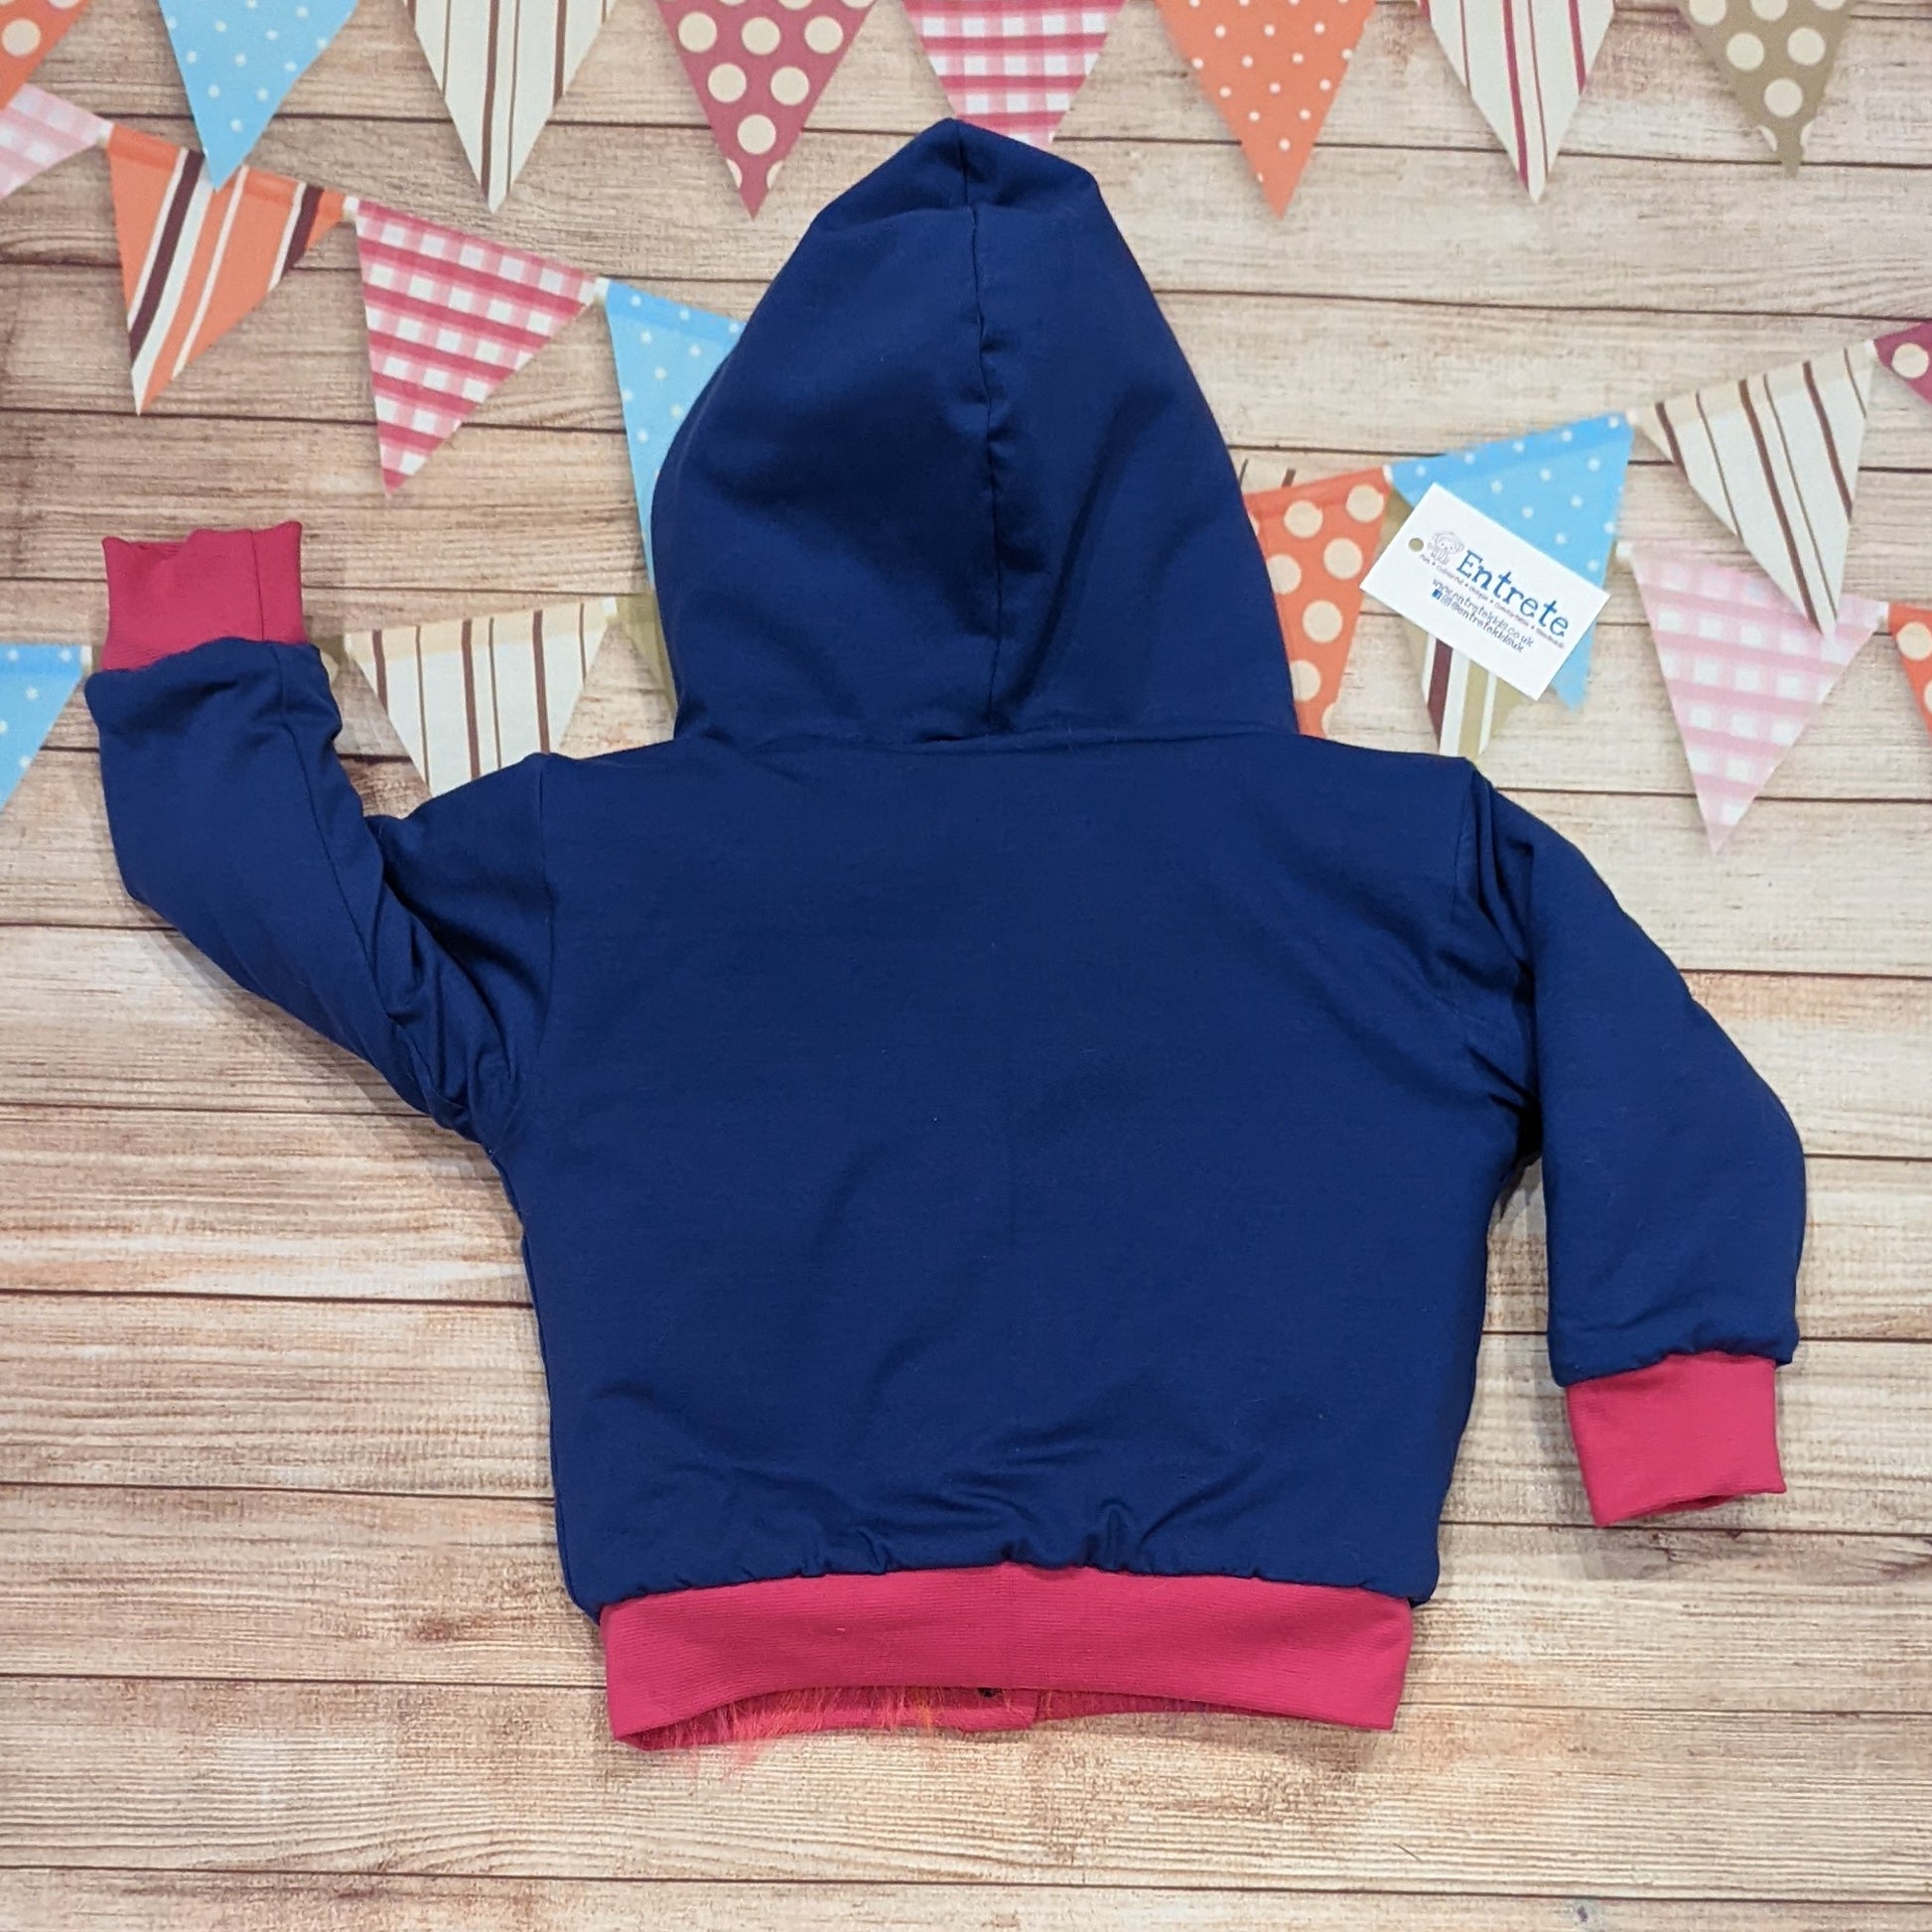 The colourful rainbow bear reversible hoodie. Handmade from rainbow long hair faux fur and fuchsia cotton ribbing, with royal blue cotton jersey on the reverse. Shown from the rear on the reverse side.